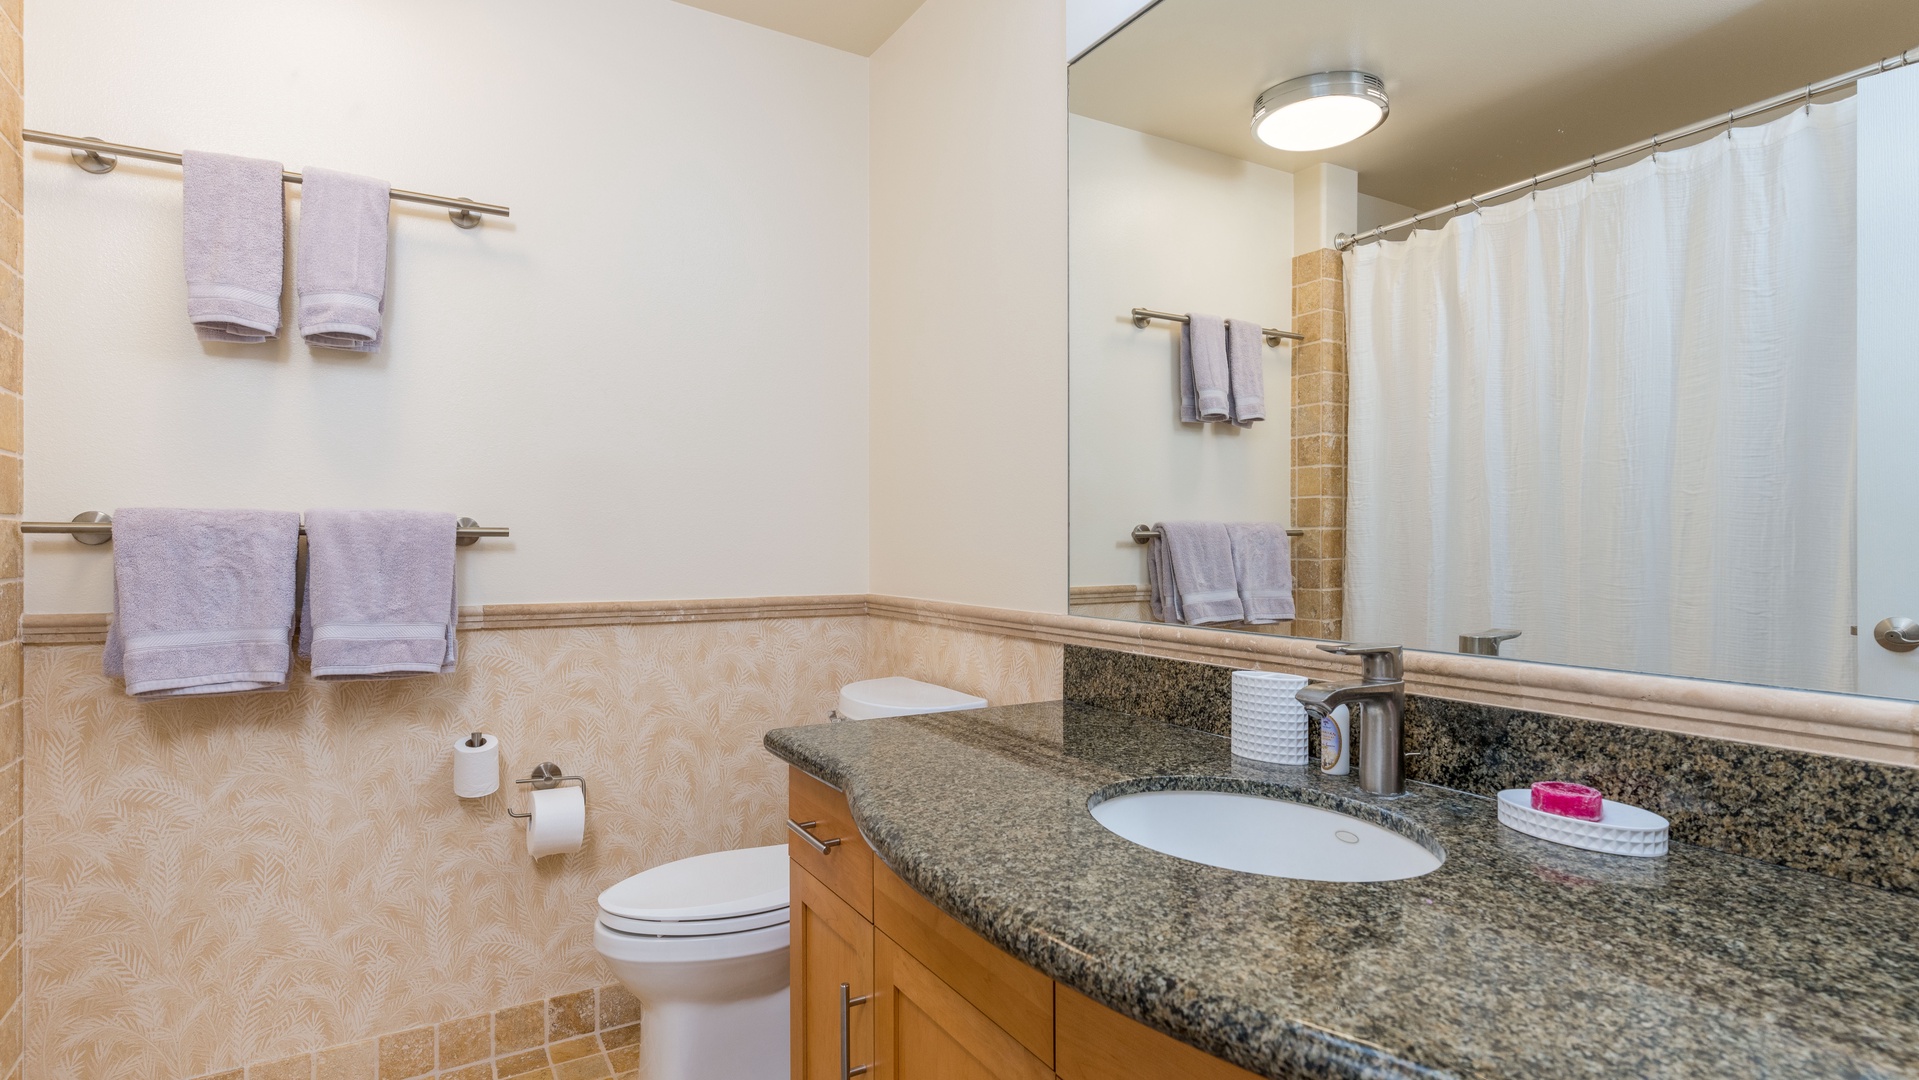 Kapolei Vacation Rentals, Kai Lani 21C - The second guest bathroom with a shower and vanity.